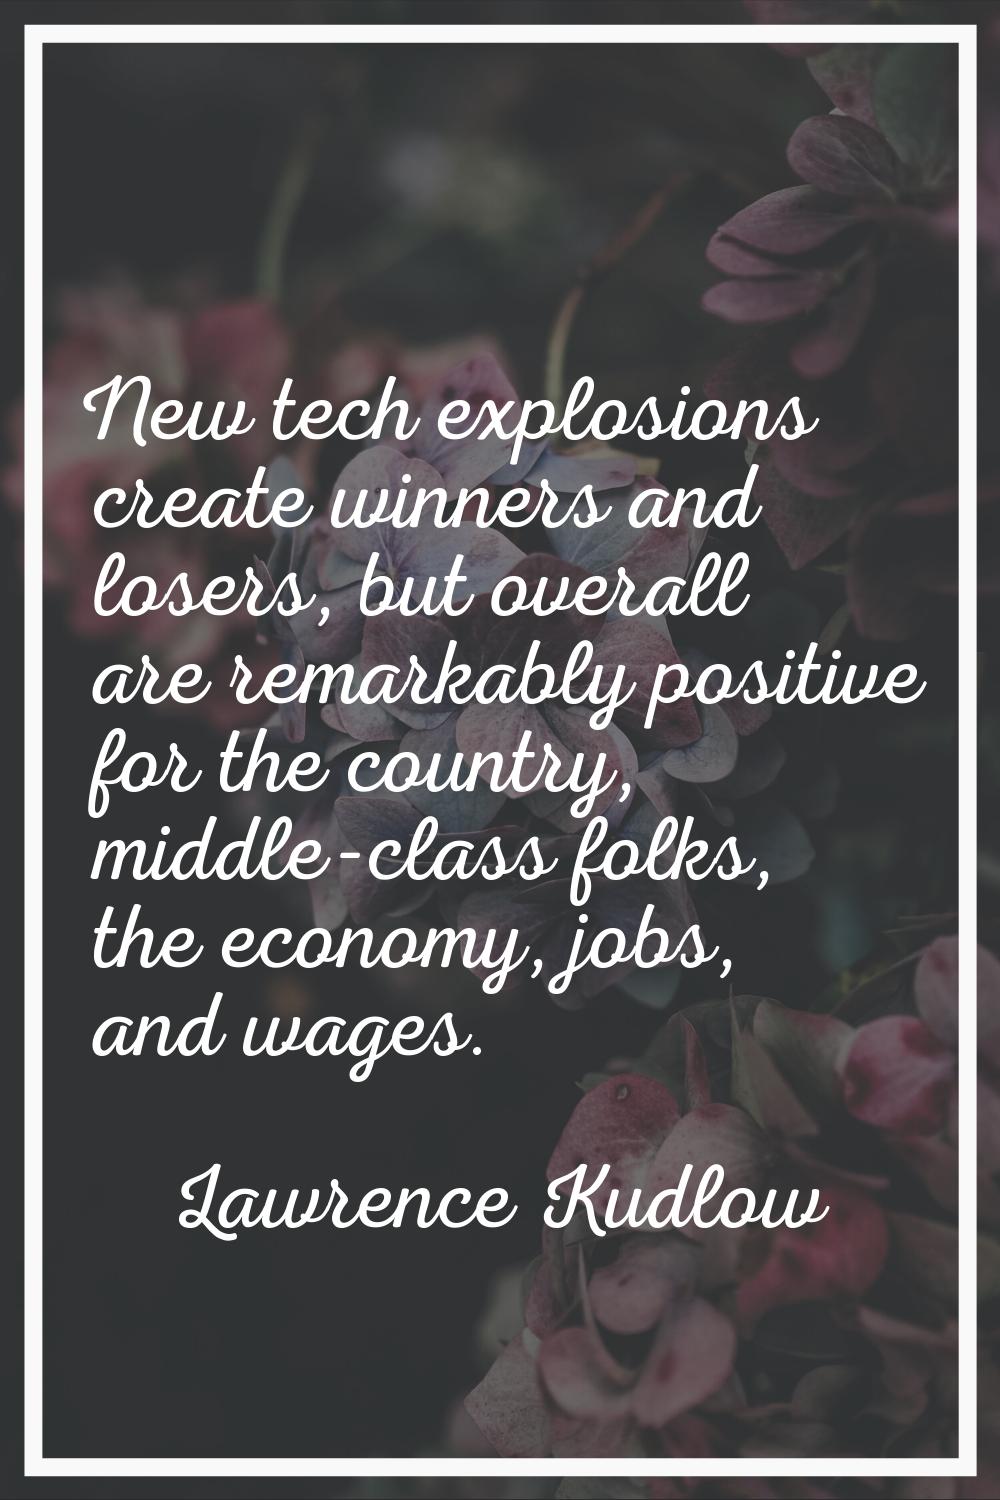 New tech explosions create winners and losers, but overall are remarkably positive for the country,